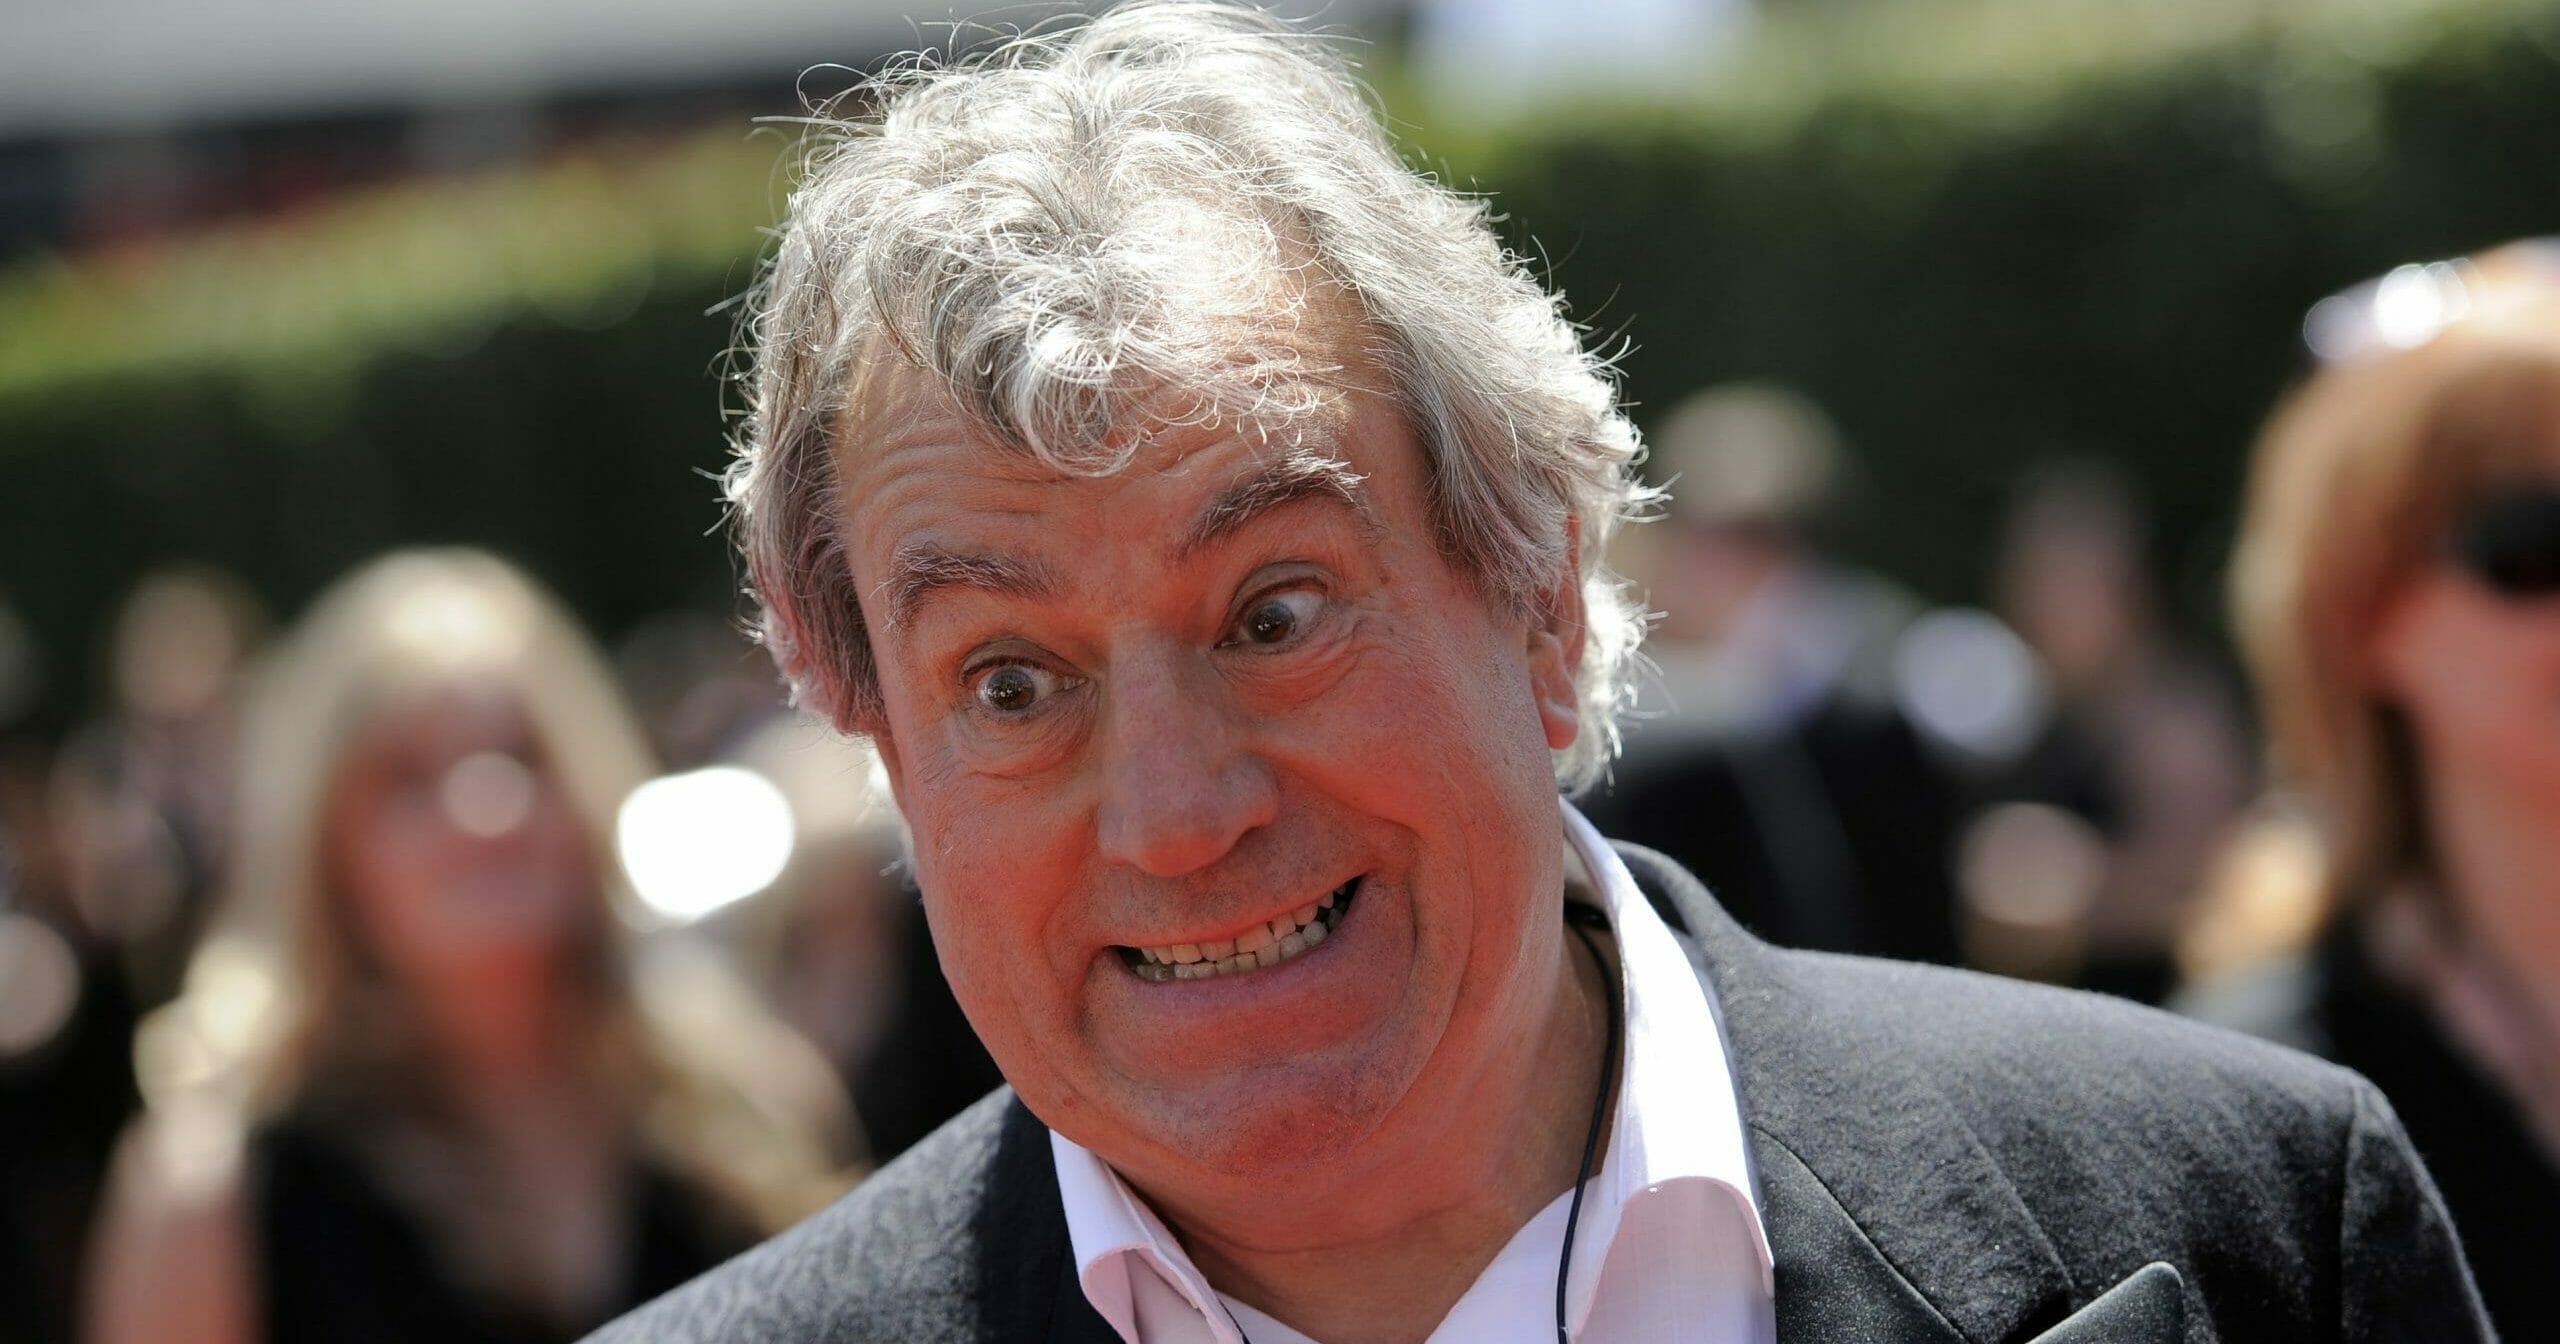 In this Aug. 21, 2010, file photo, Terry Jones arrives at the Creative Arts Emmy Awards in Los Angeles. Jones, a member of the Monty Python comedy troupe, has died at 77.